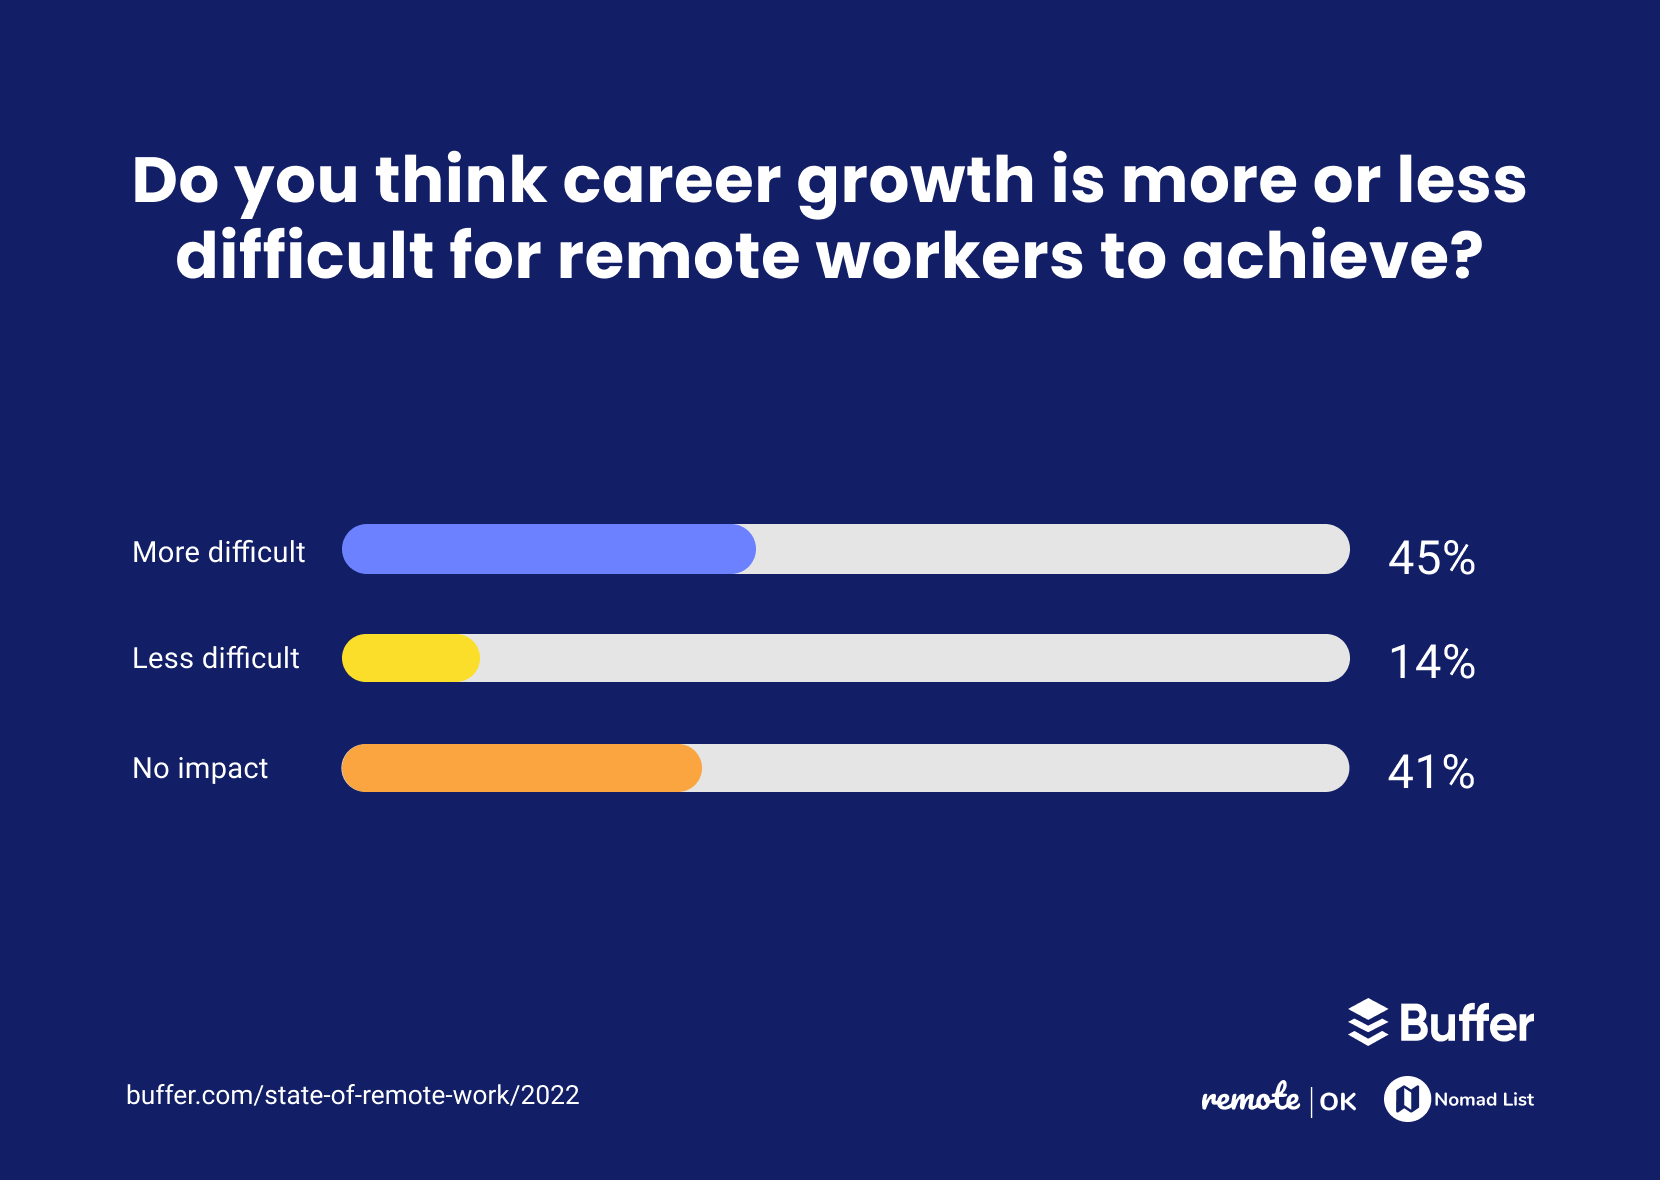 Do you think career growth is more or less difficult for remote workers to achieve?